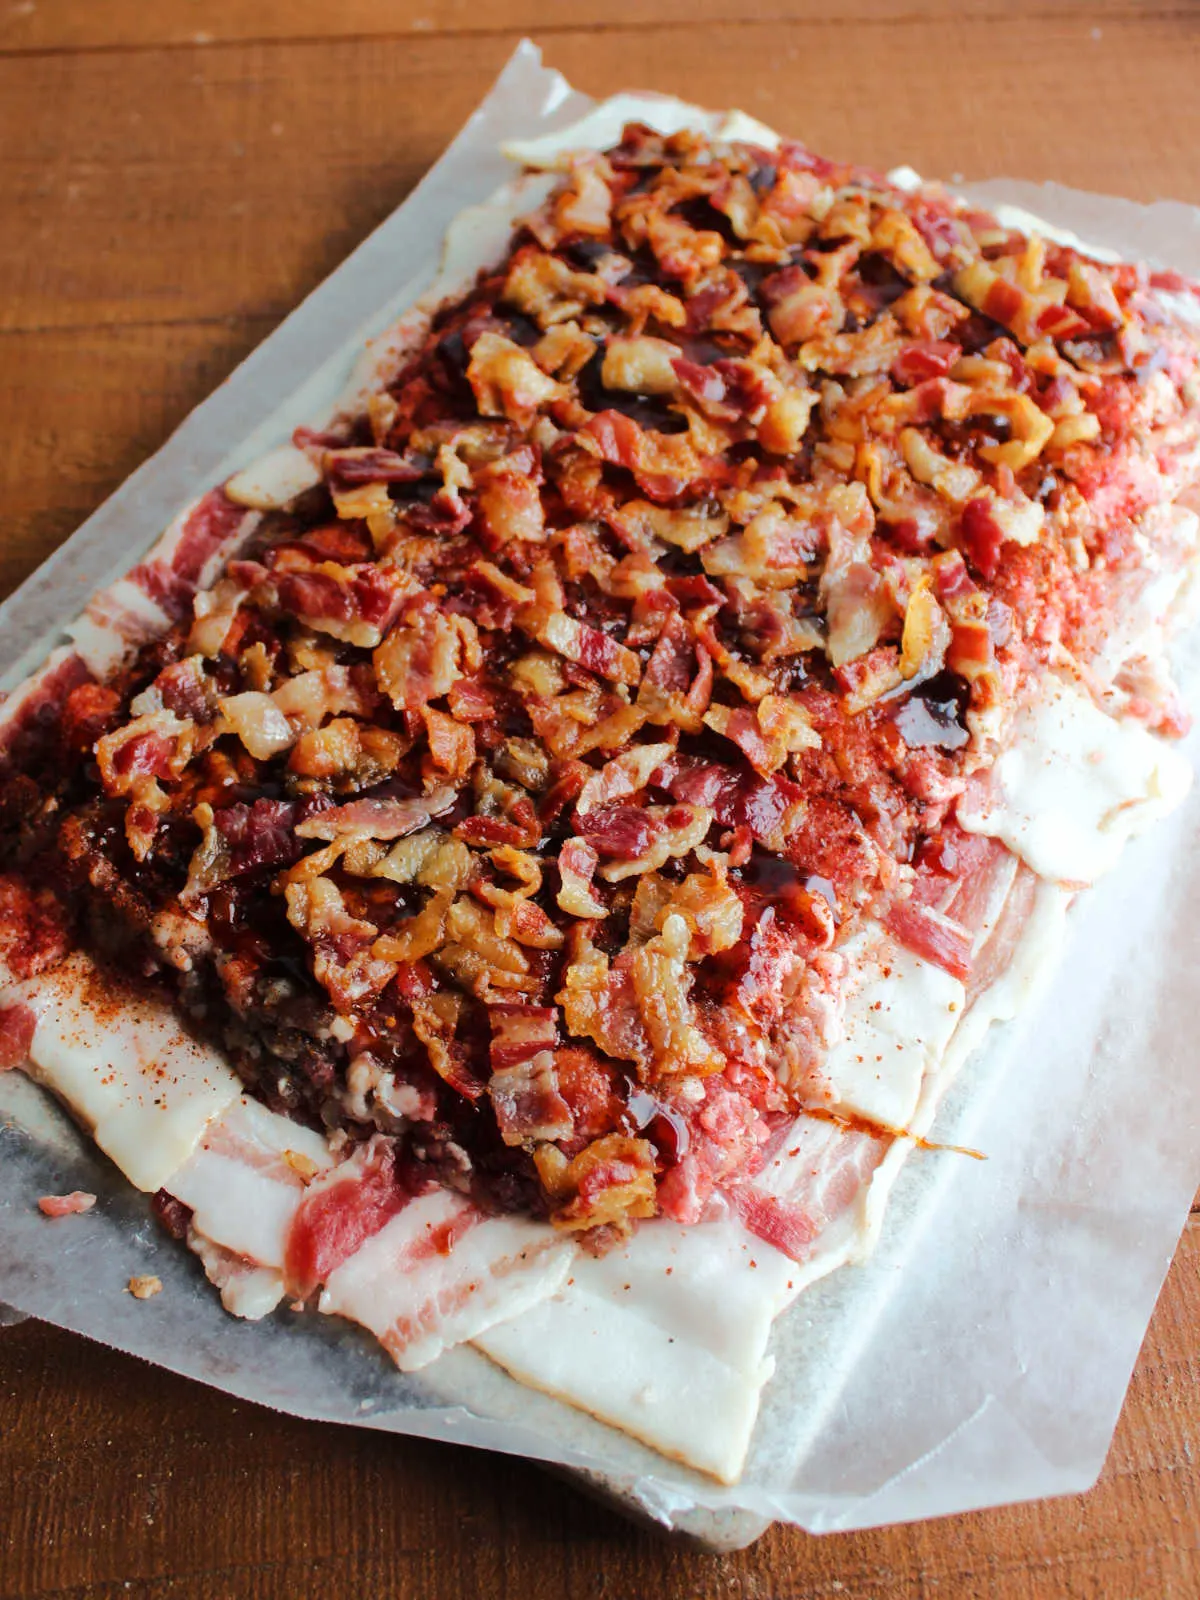 Cooked and crumbled bacon spread over the top of the ground pork, ready to be rolled into the middle of the bacon fatty.